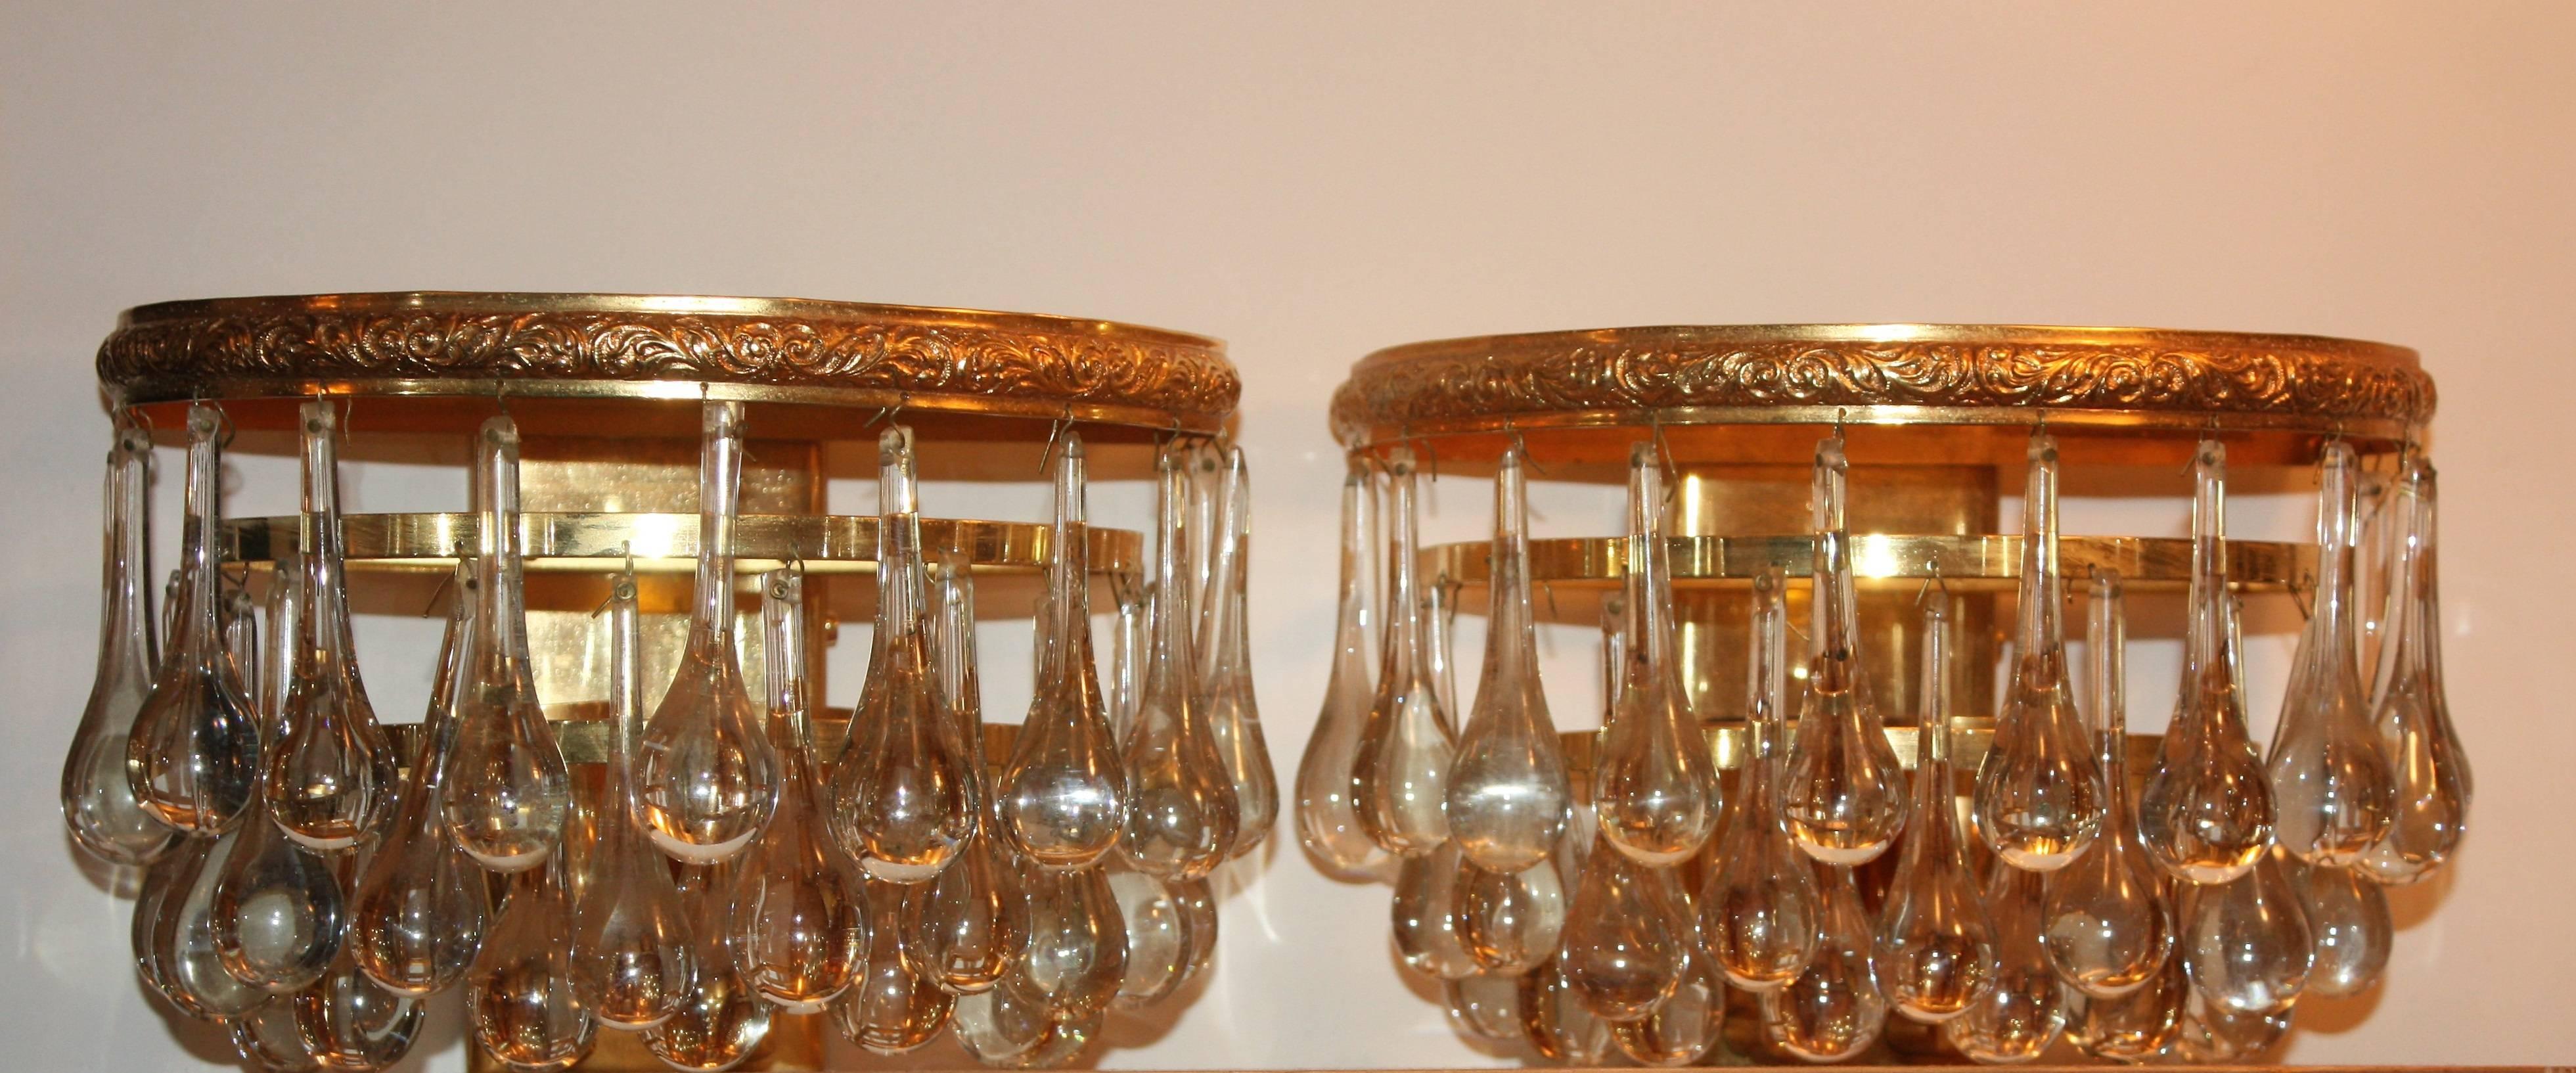 German Pair of Mid - Century Murano Glass Wall Sconces Attr. to E.Palme, circa 1960s For Sale